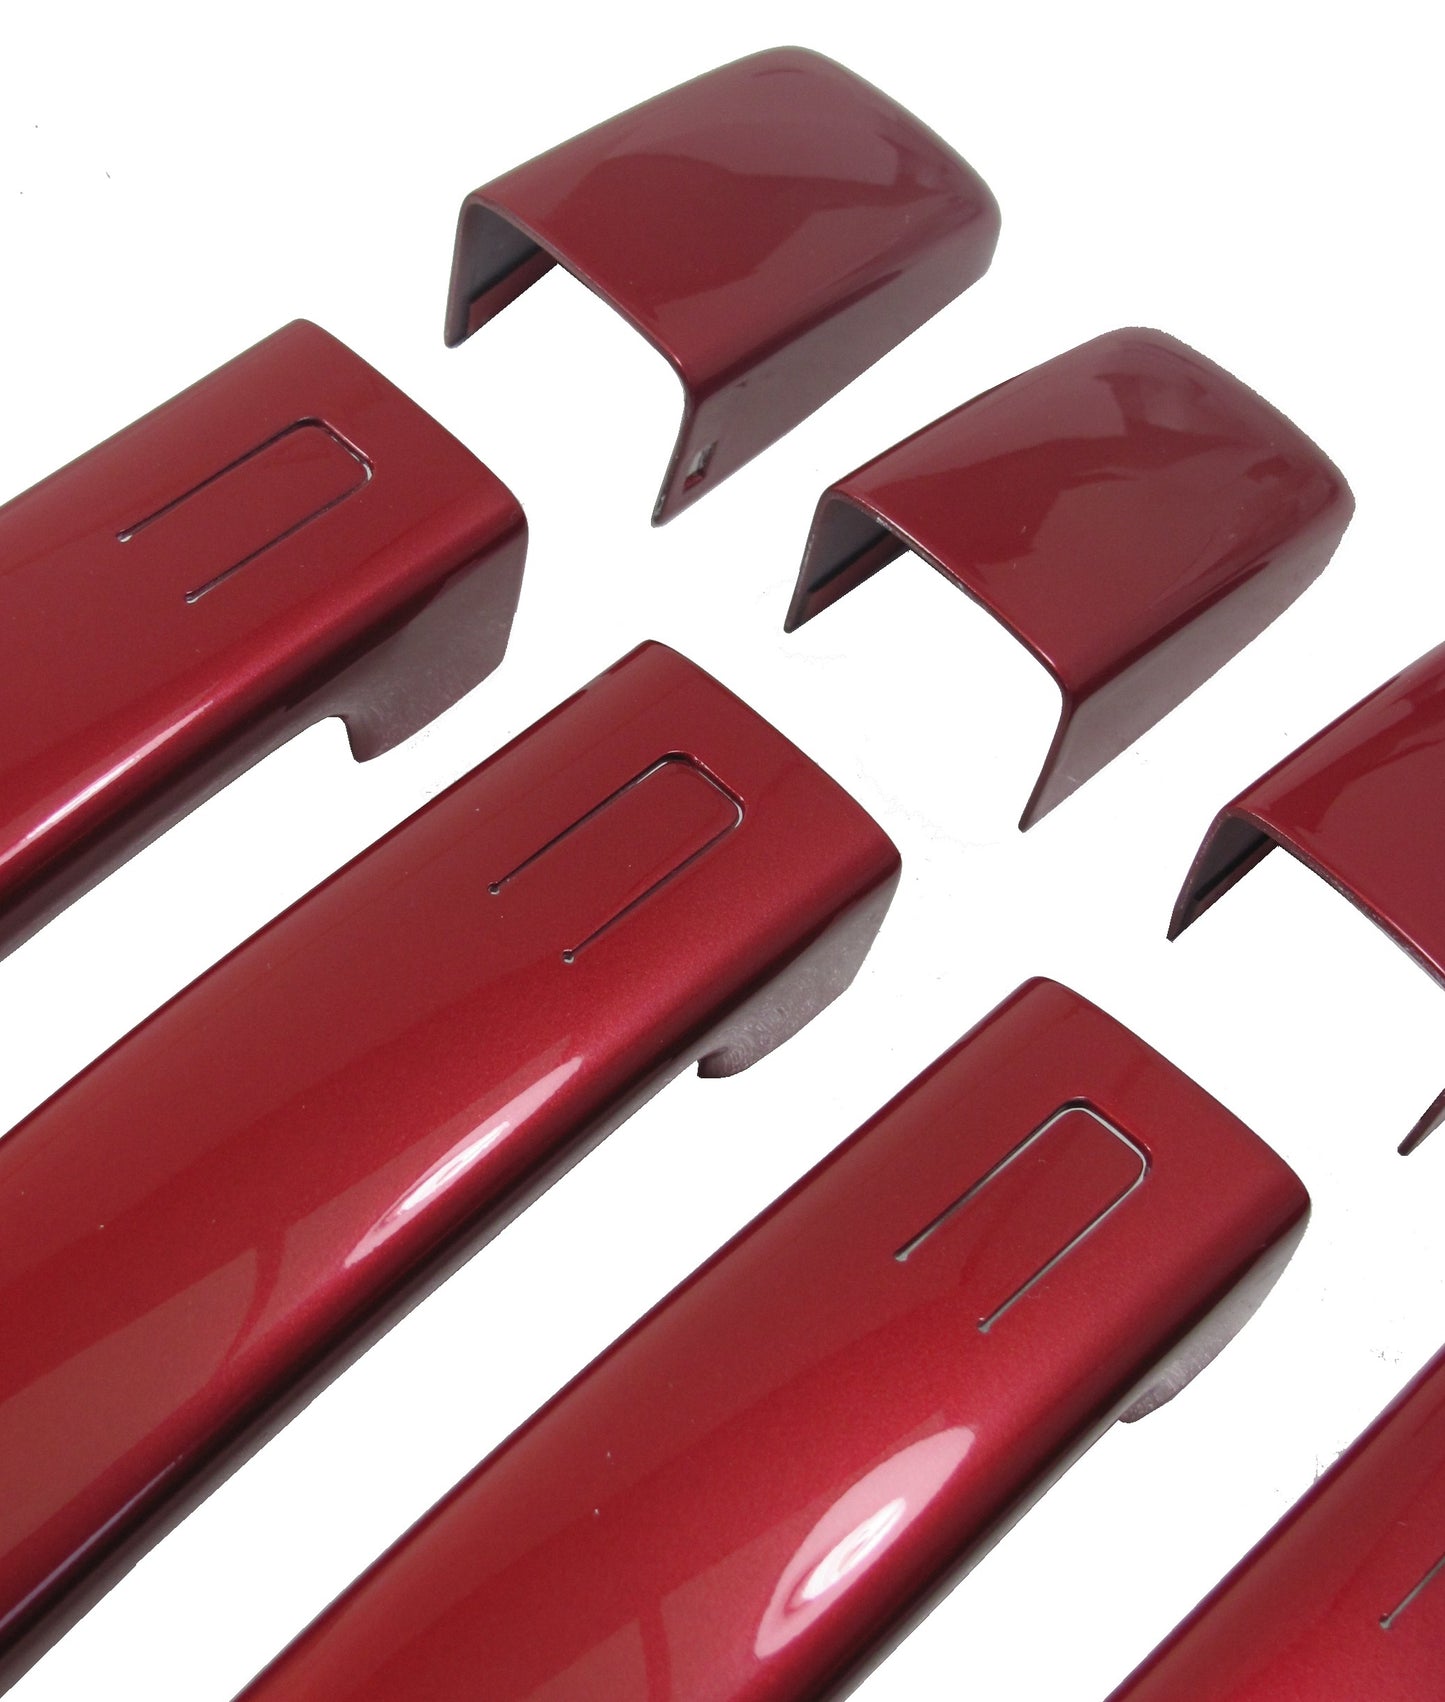 Door Handle Covers for Range Rover Sport L320 2010 on with Button in Handle - Firenze Red